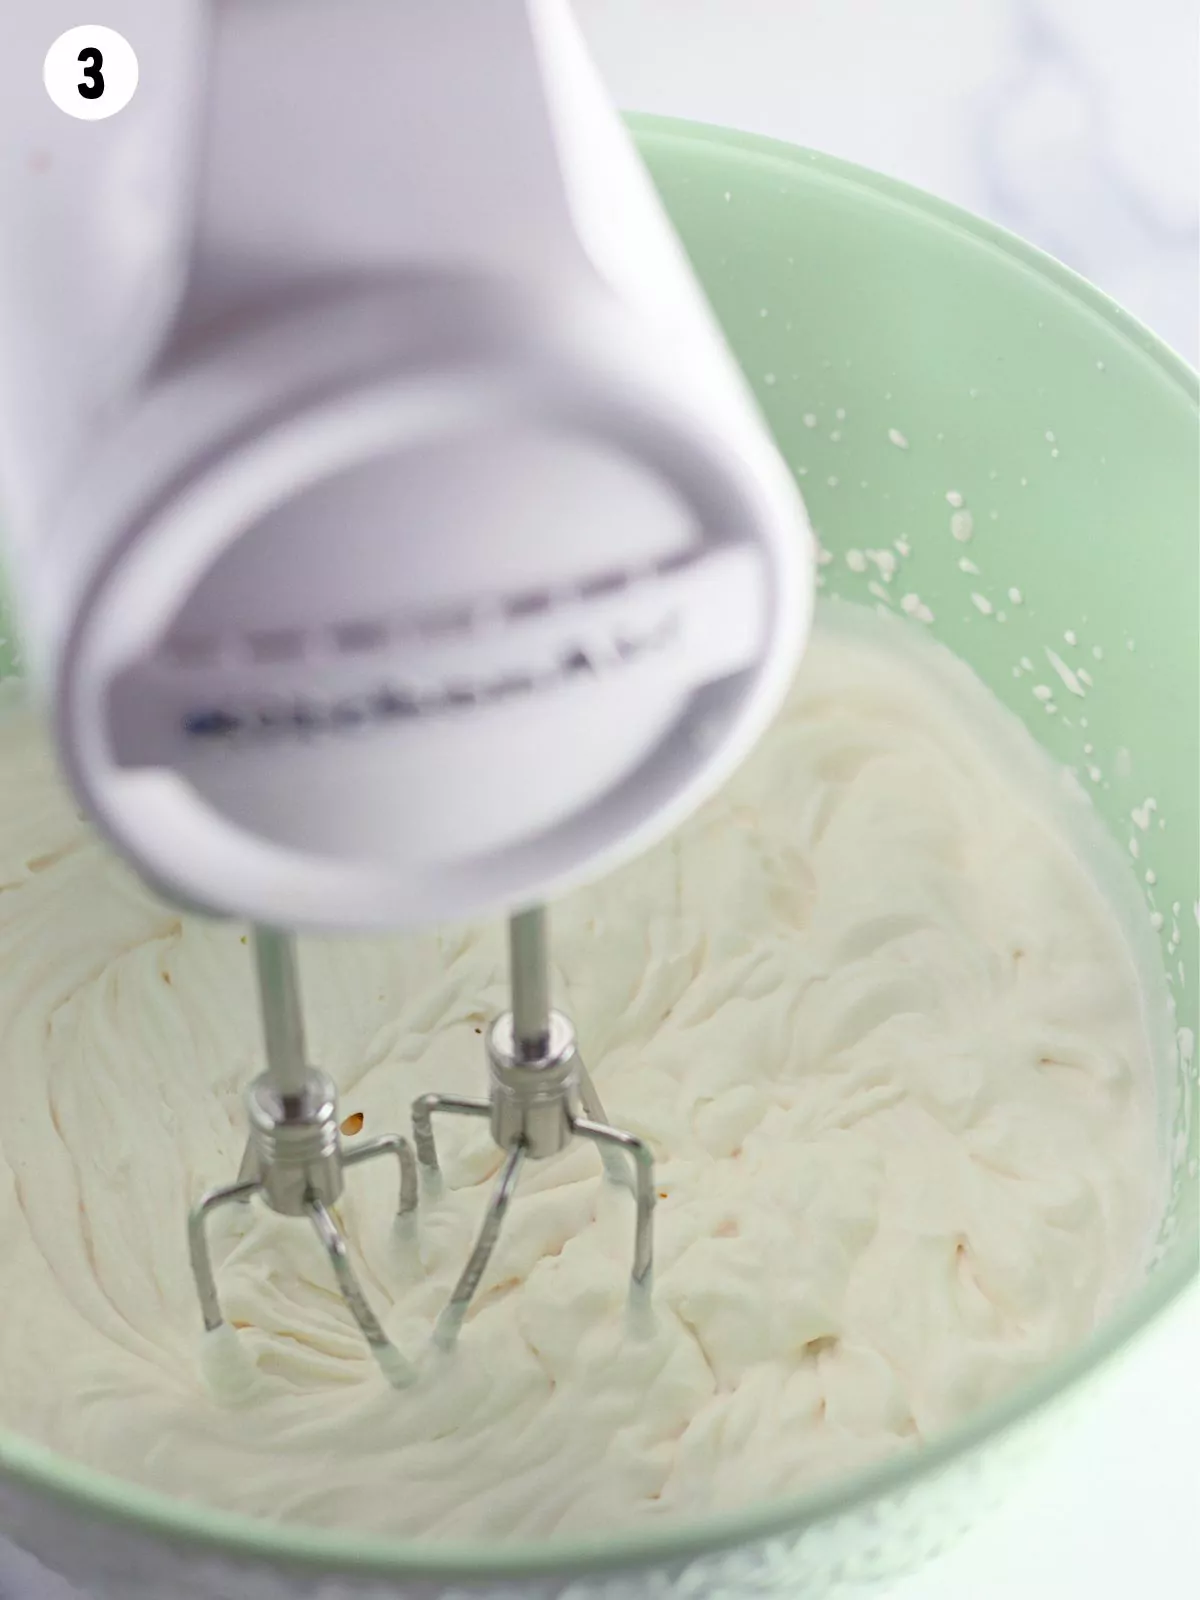 Making homemade whipped cream with electric mixer in bowl.